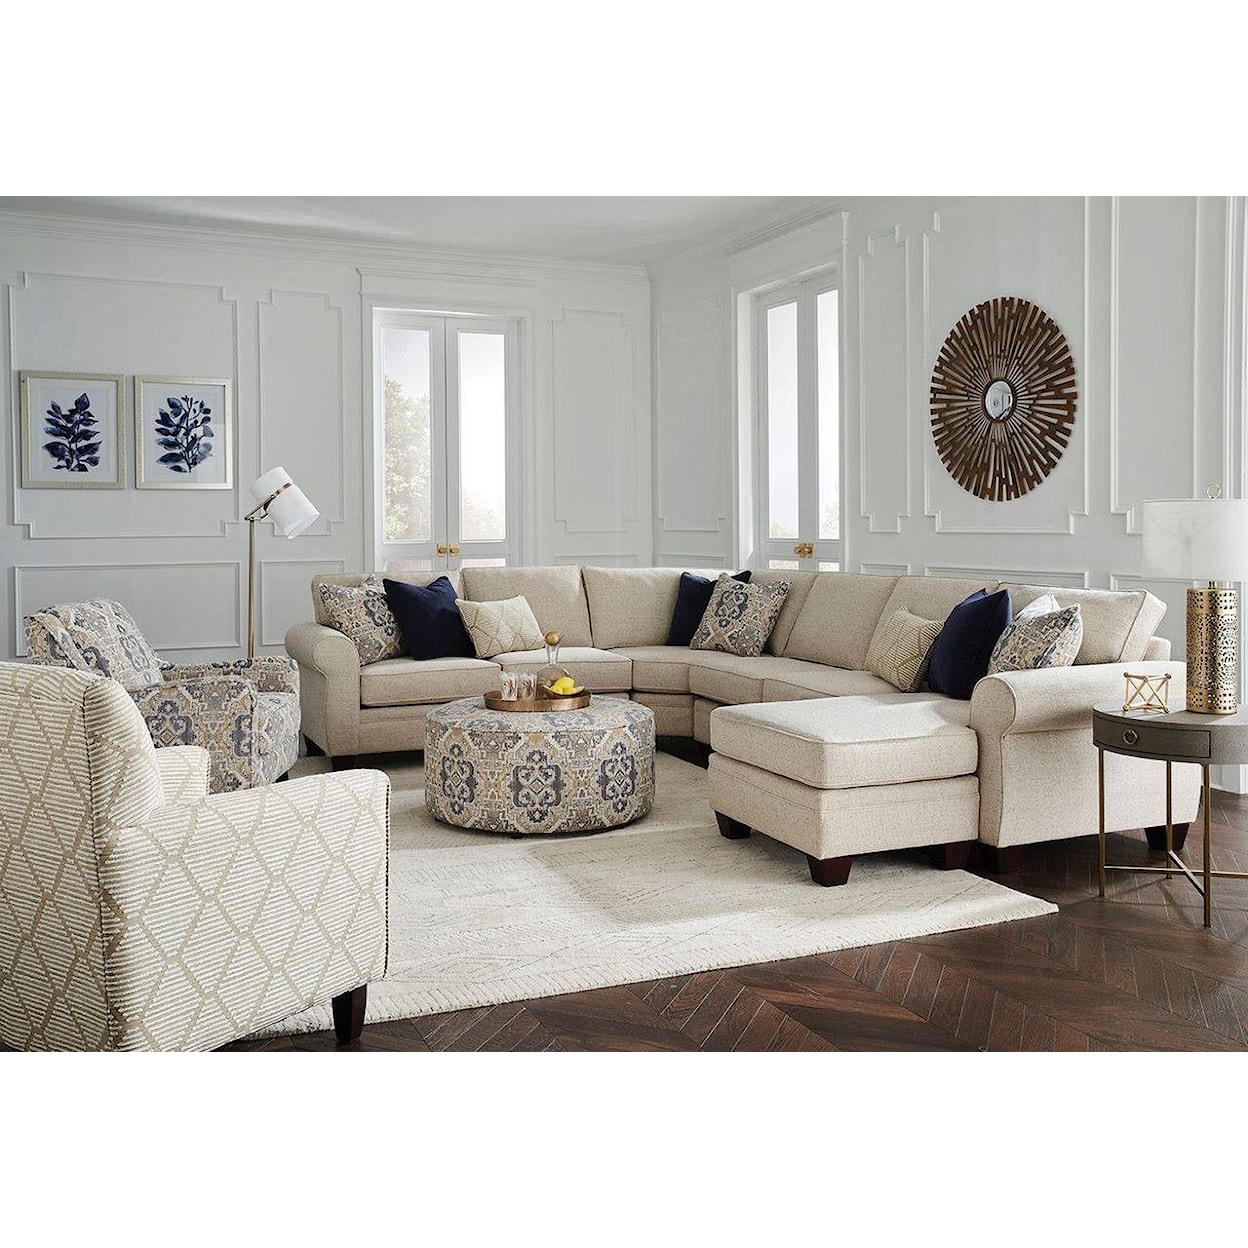 Fusion Furniture 1170 PLUMLEY BISQUE Sectional with Right Chaise